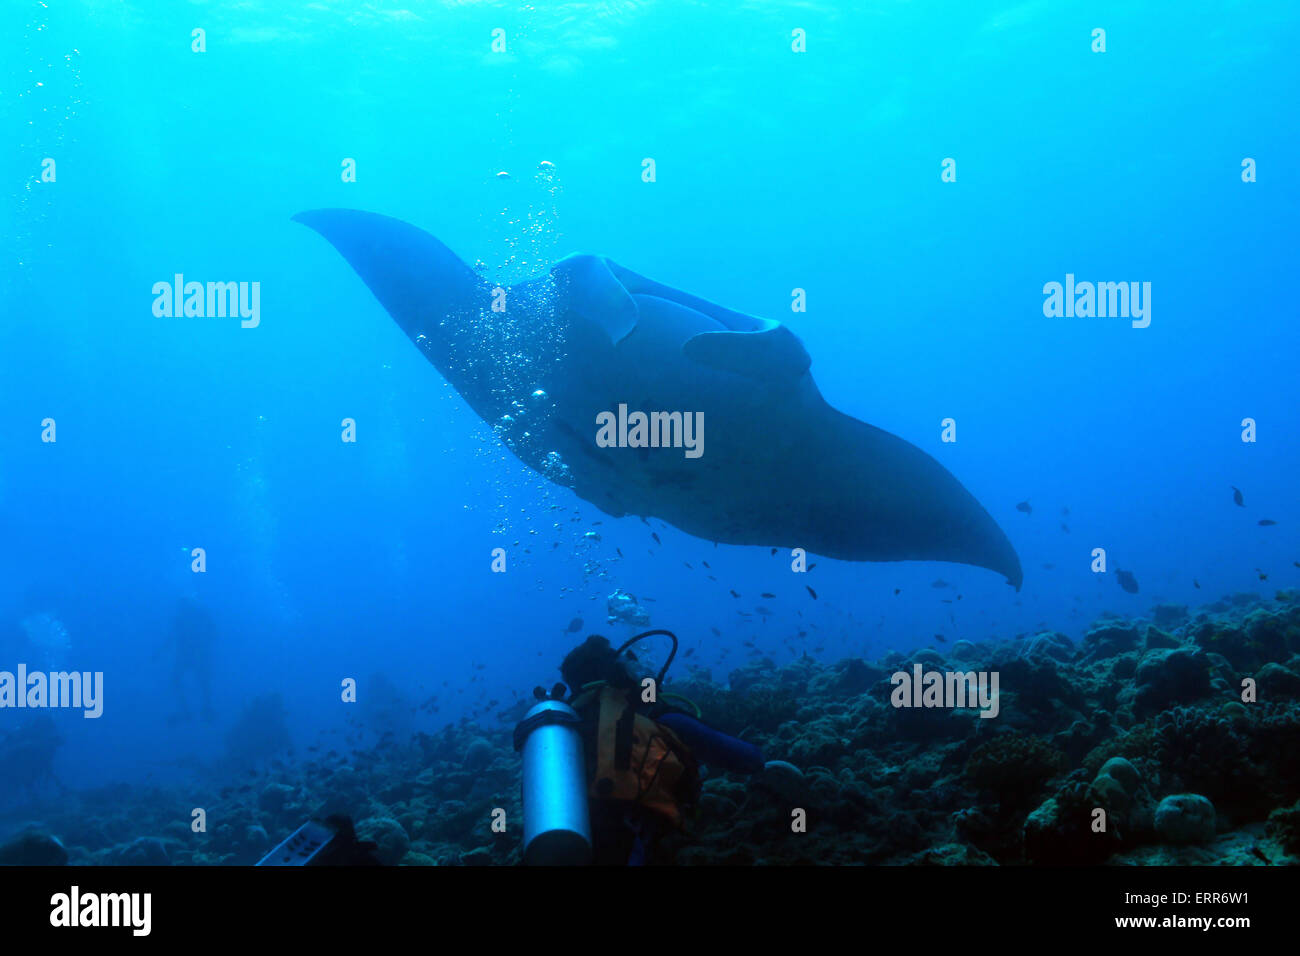 Manta Ray (Manta Birostris) Approaching over the Reef, with Diver in Foreground, South Ari Atoll, Maldives Stock Photo